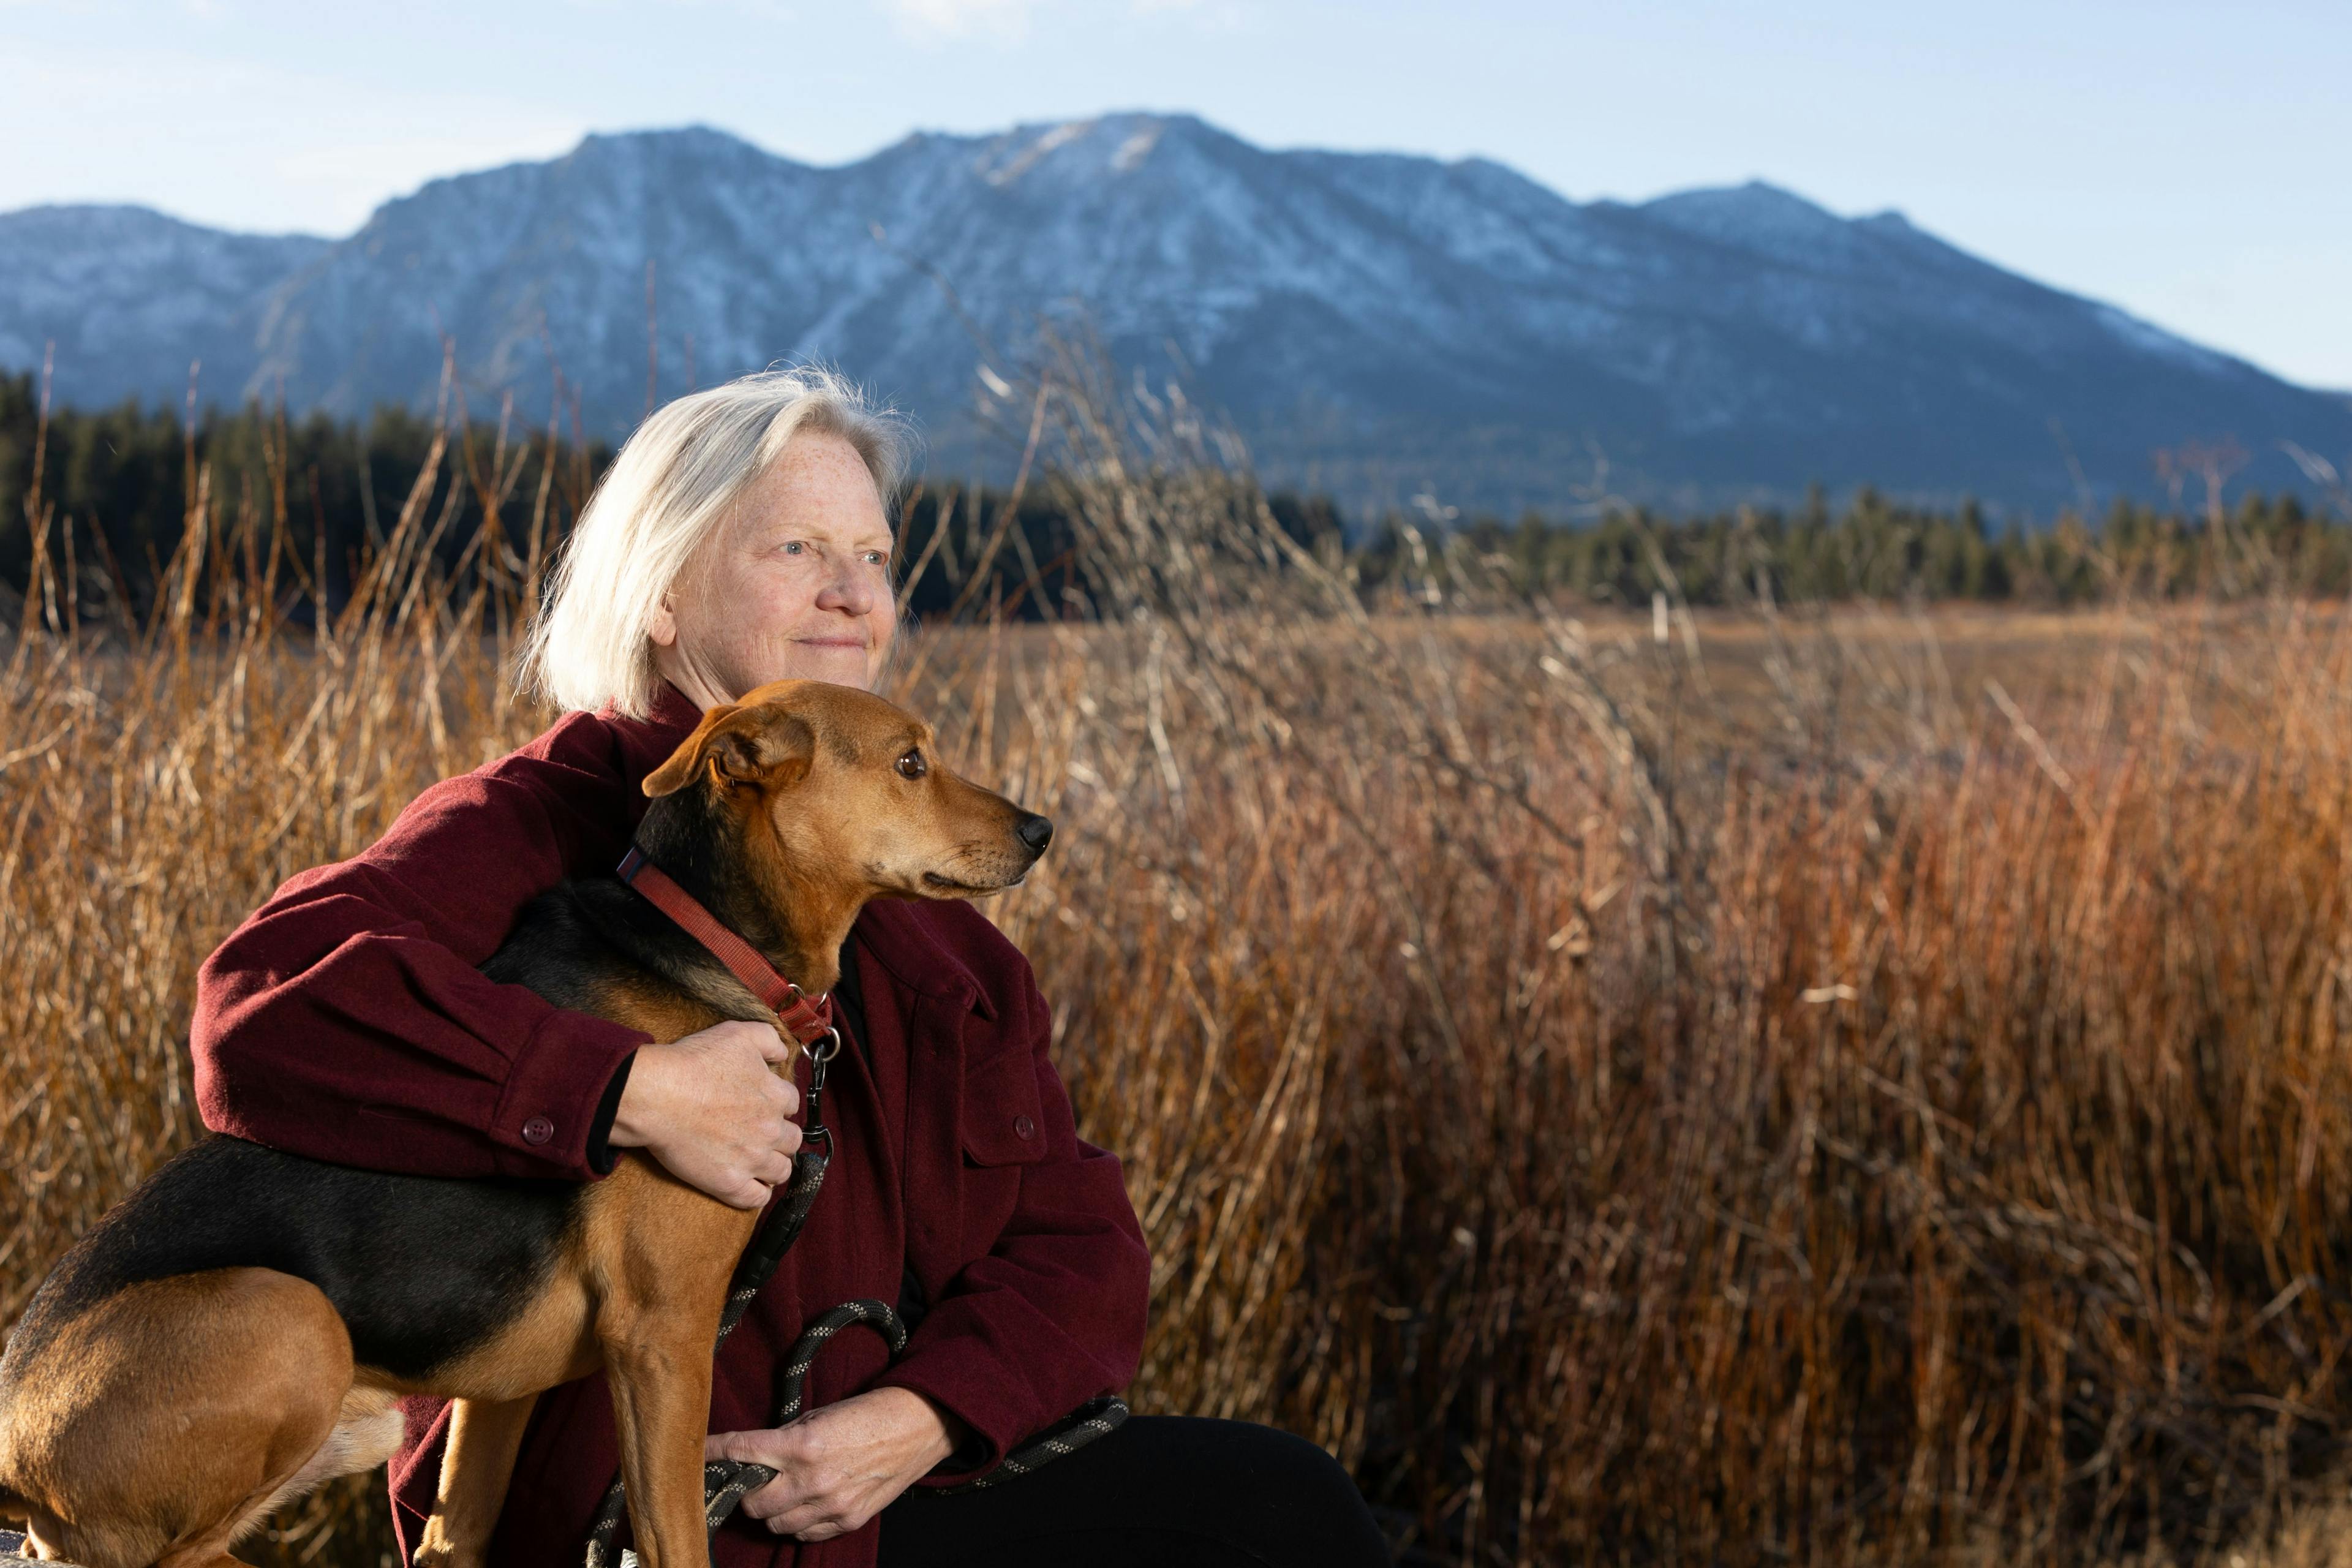 cancer survivor, Dr. Kelly Shanahan with her dog, looking off in the distance  | Photo credit: Danielle Hankinson of Kindred Soul Photography